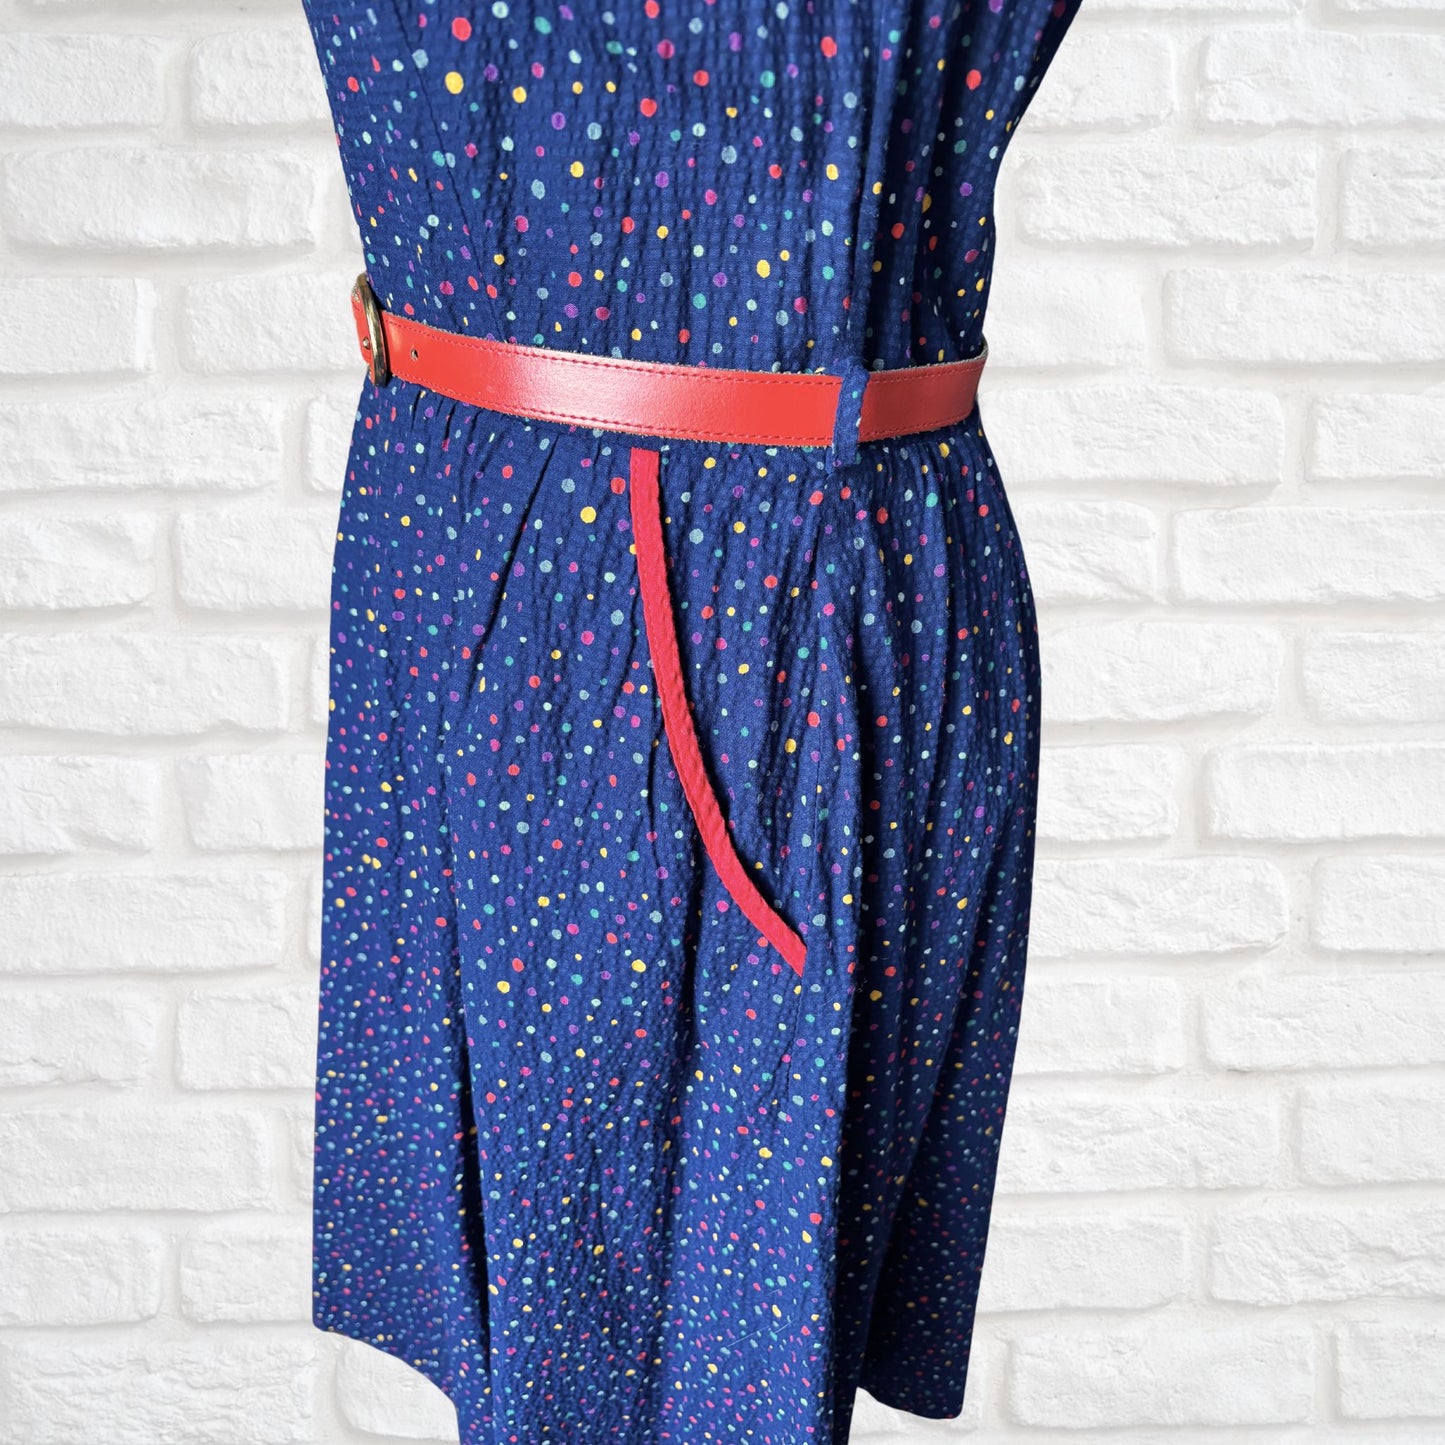 70s dark blue and rainbow polka dot sundress with red trim and belt. Approx UK size 10- 12